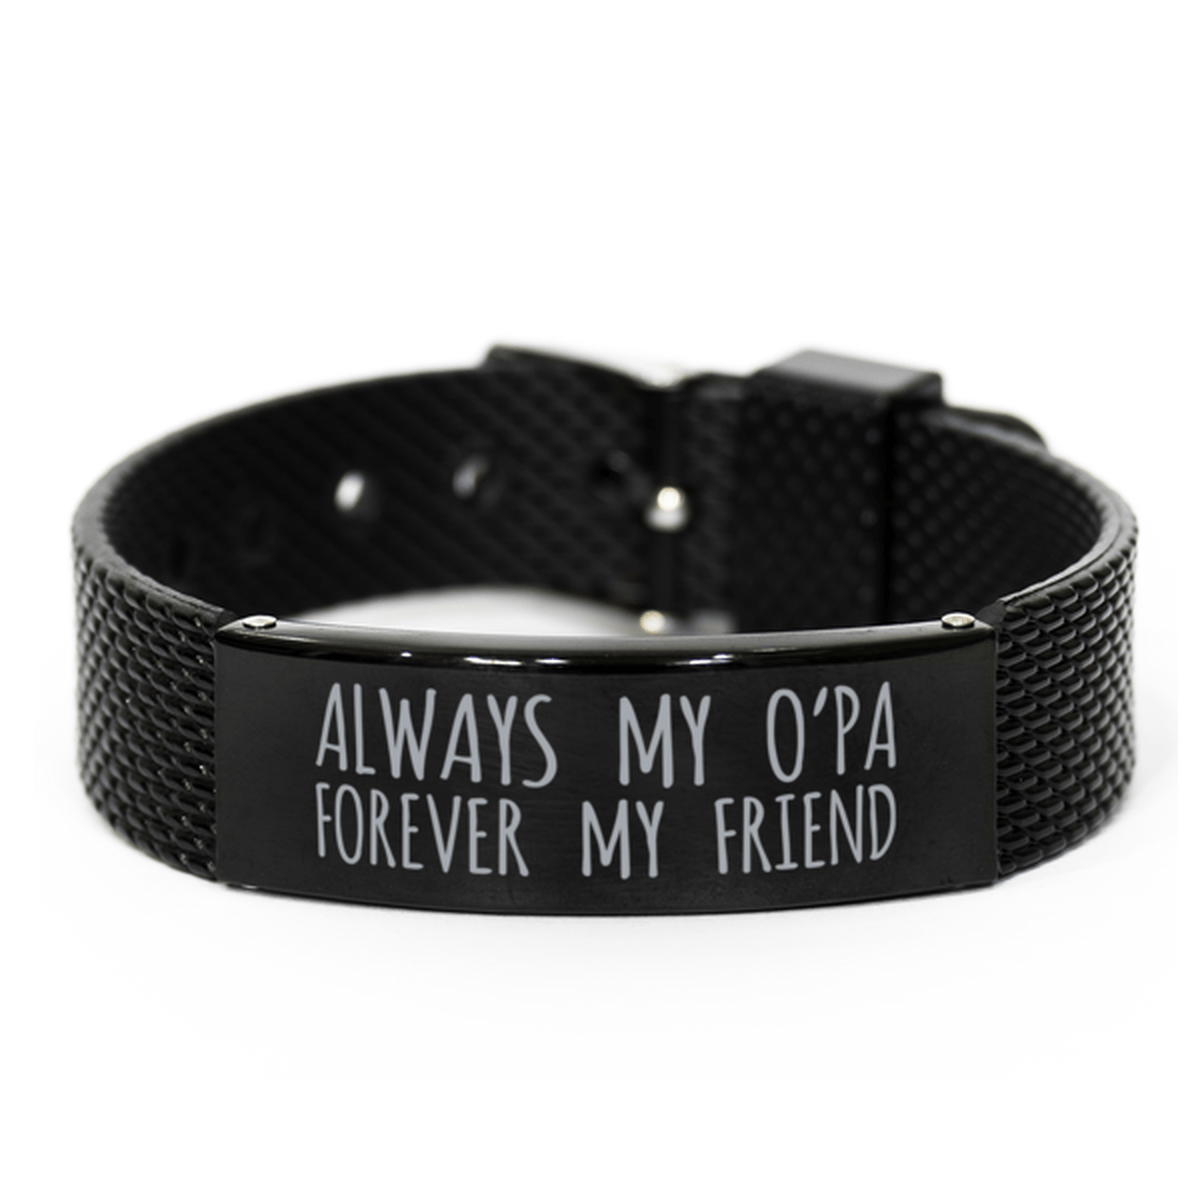 Inspirational O'Pa Black Shark Mesh Bracelet, Always My O'Pa Forever My Friend, Best Birthday Gifts for Family Friends